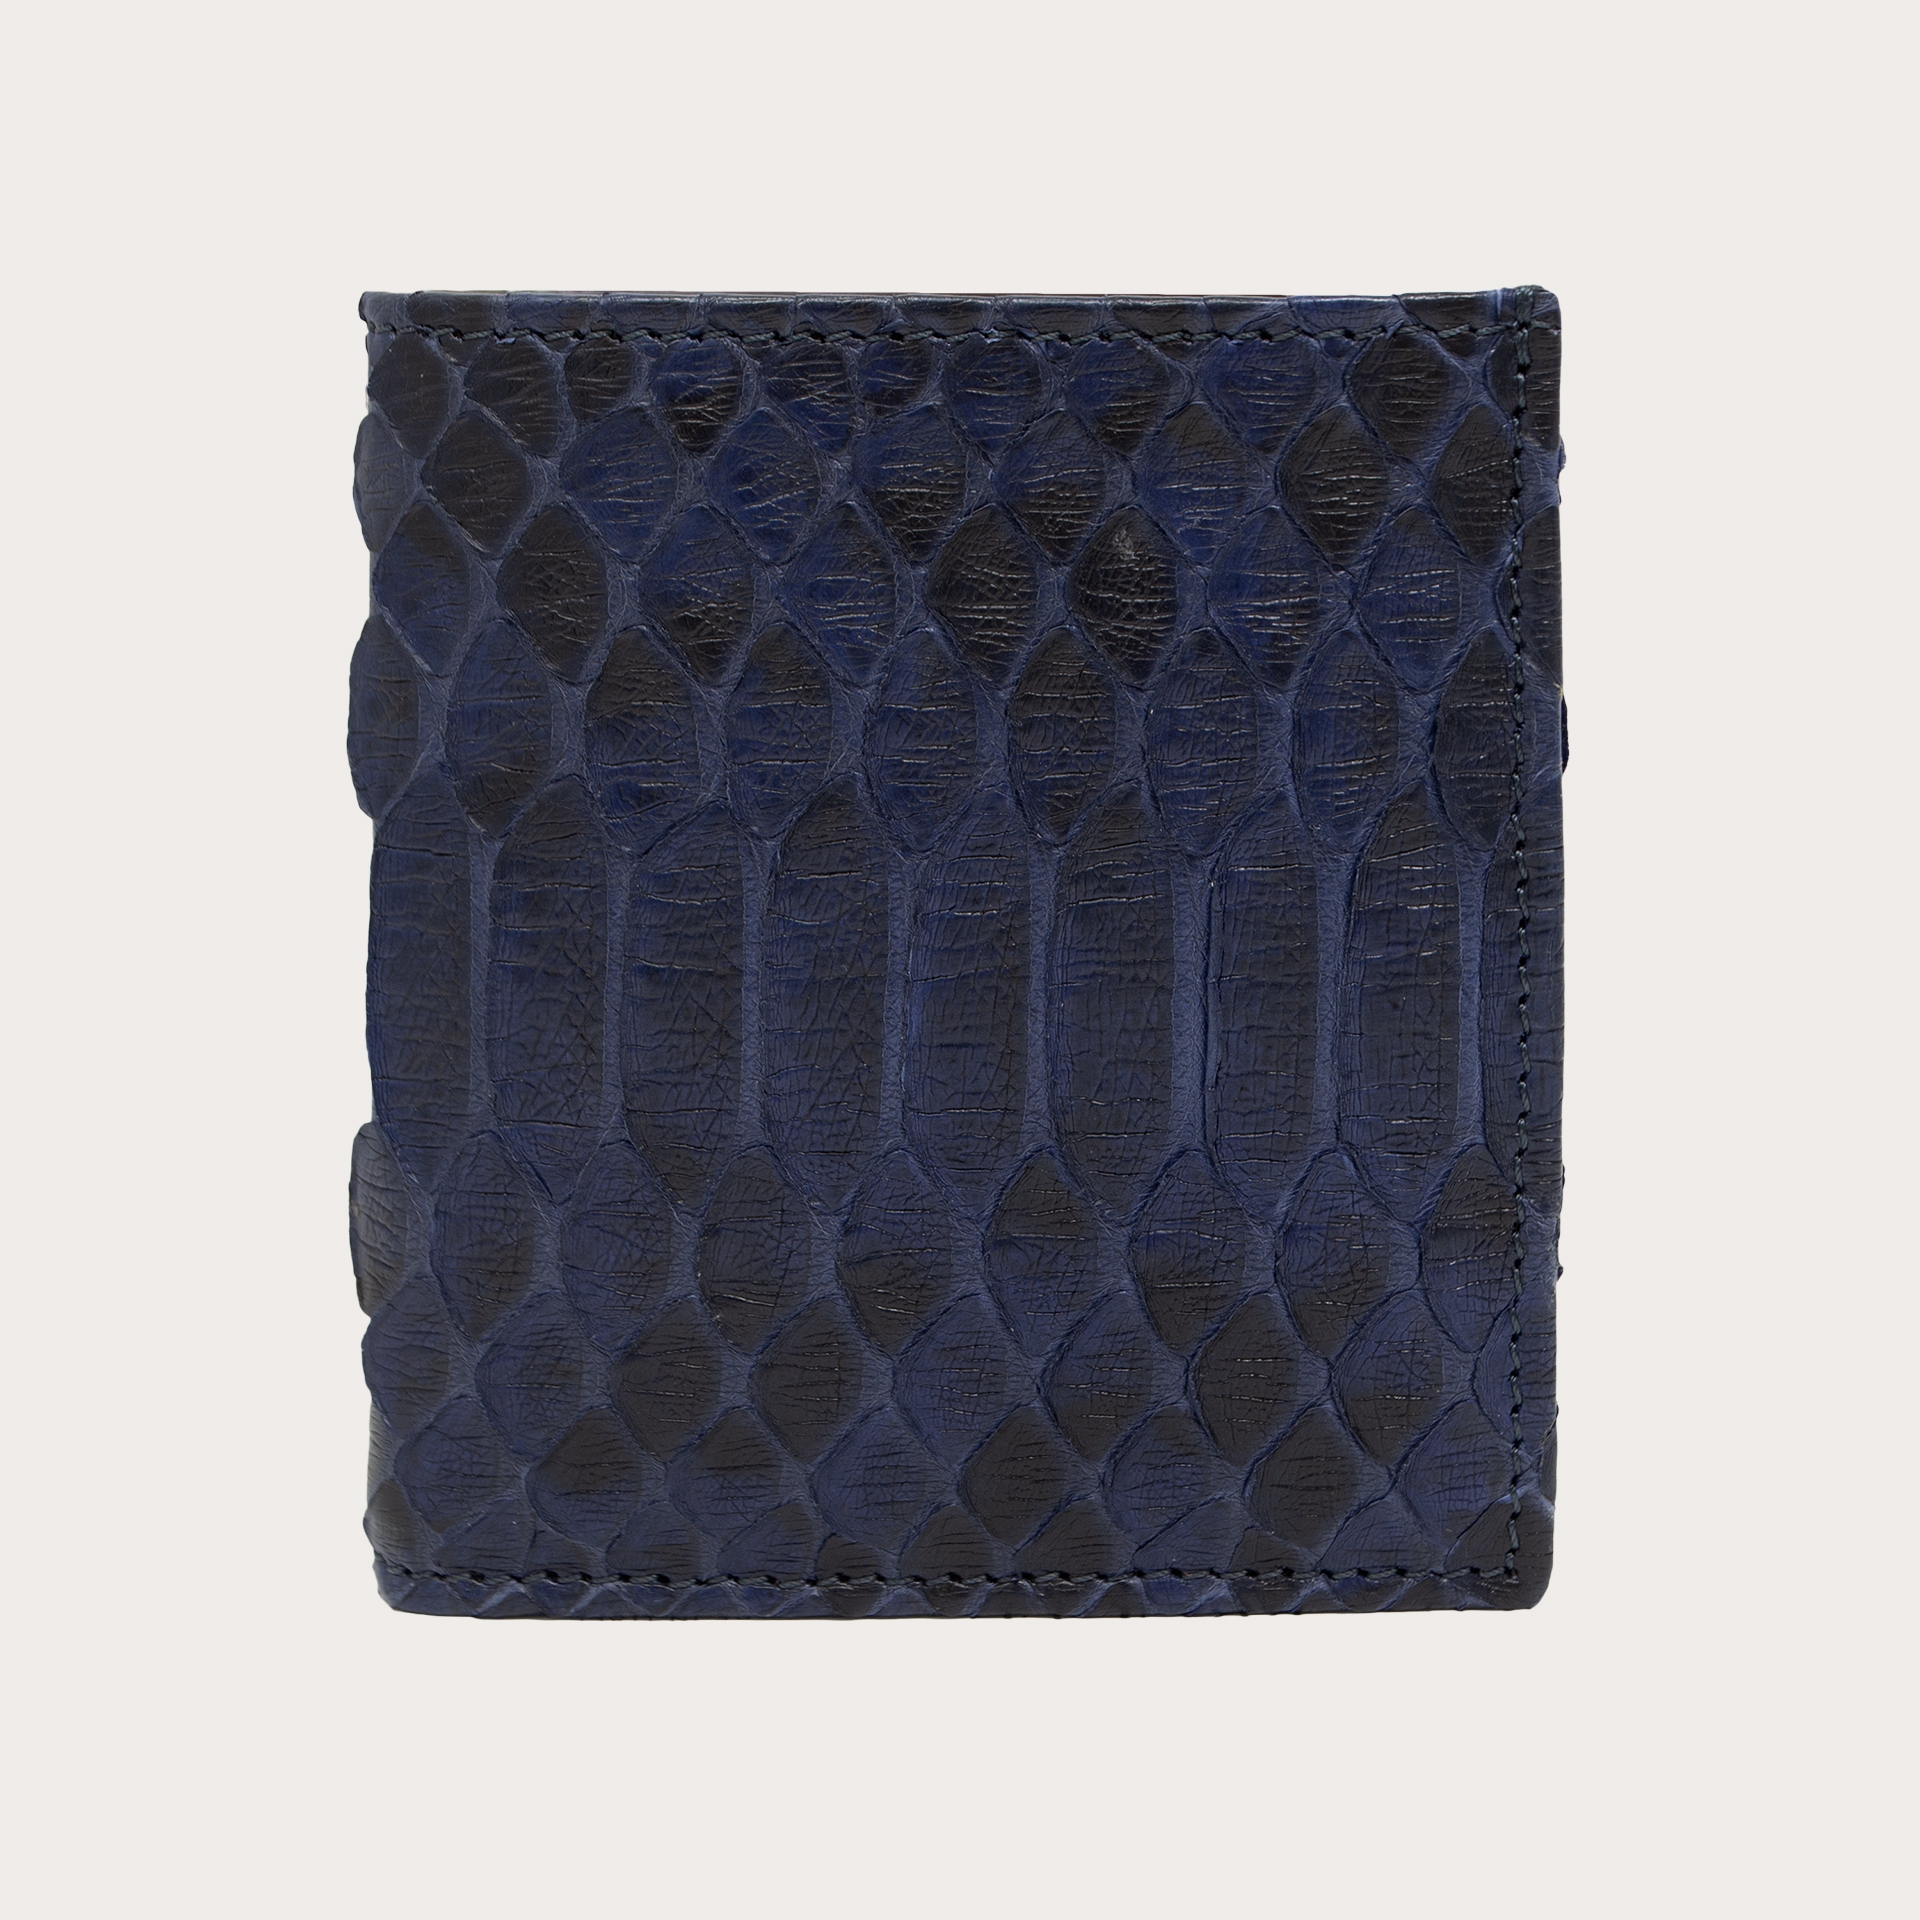 Bifold compact python leather wallet, blue navy